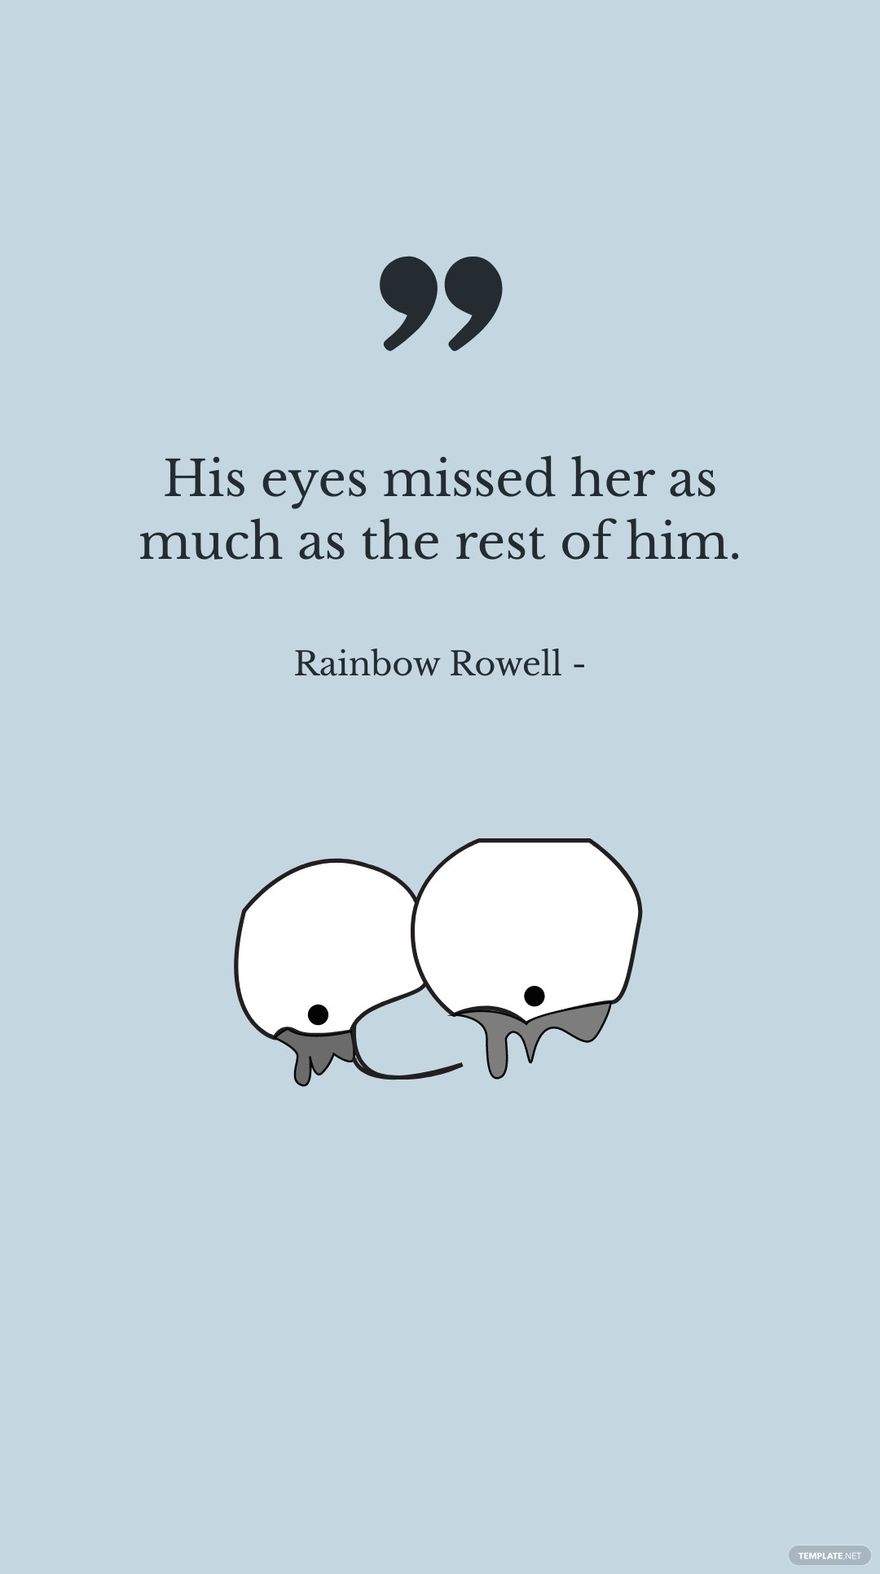 Rainbow Rowell - His eyes missed her as much as the rest of him.